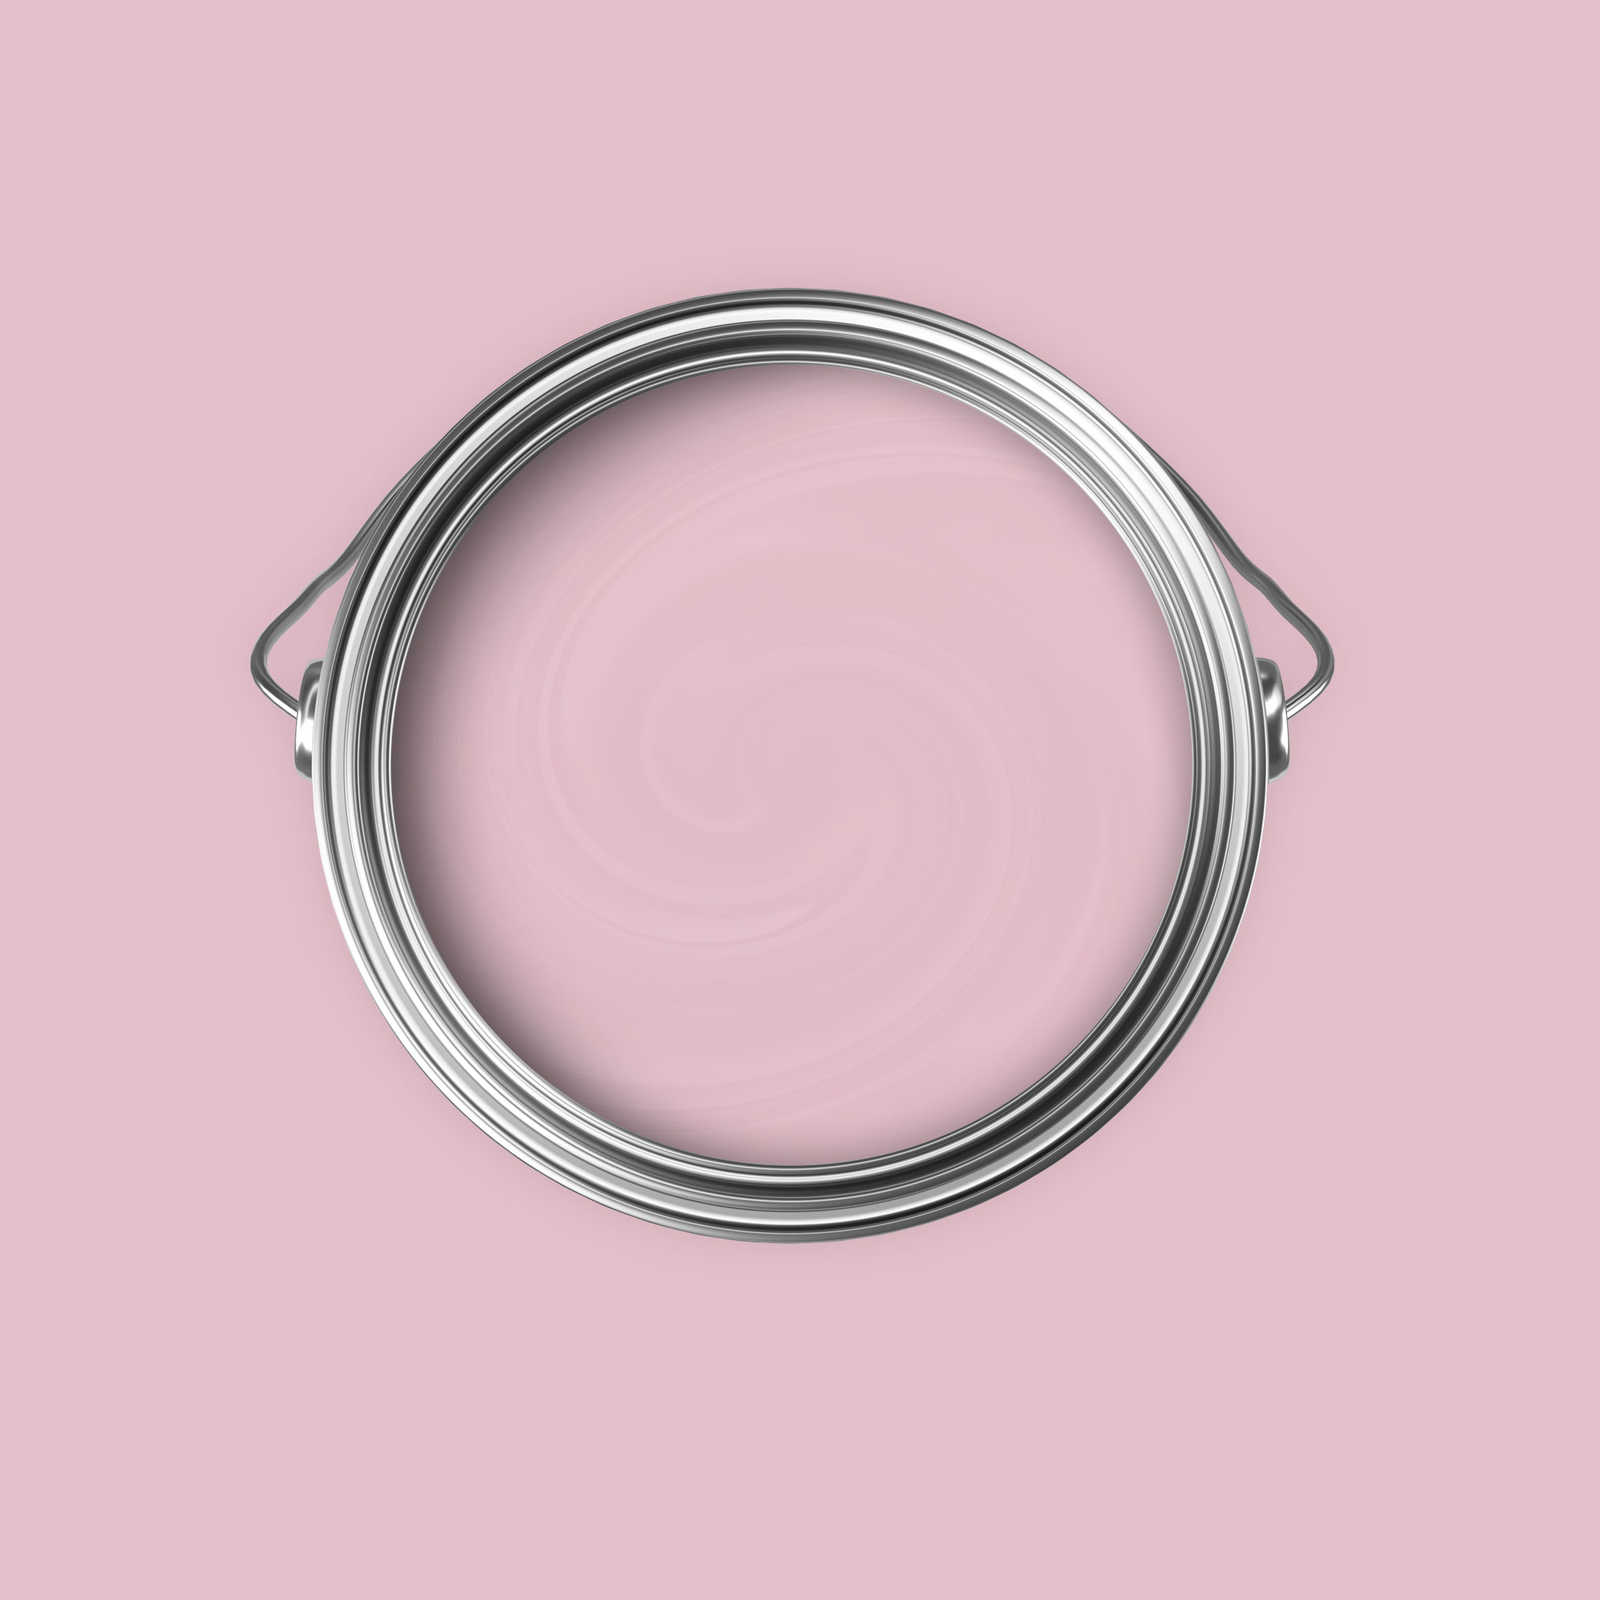             Premium Wall Paint serene pink »Beautiful Berry« NW209 – 5 litre
        